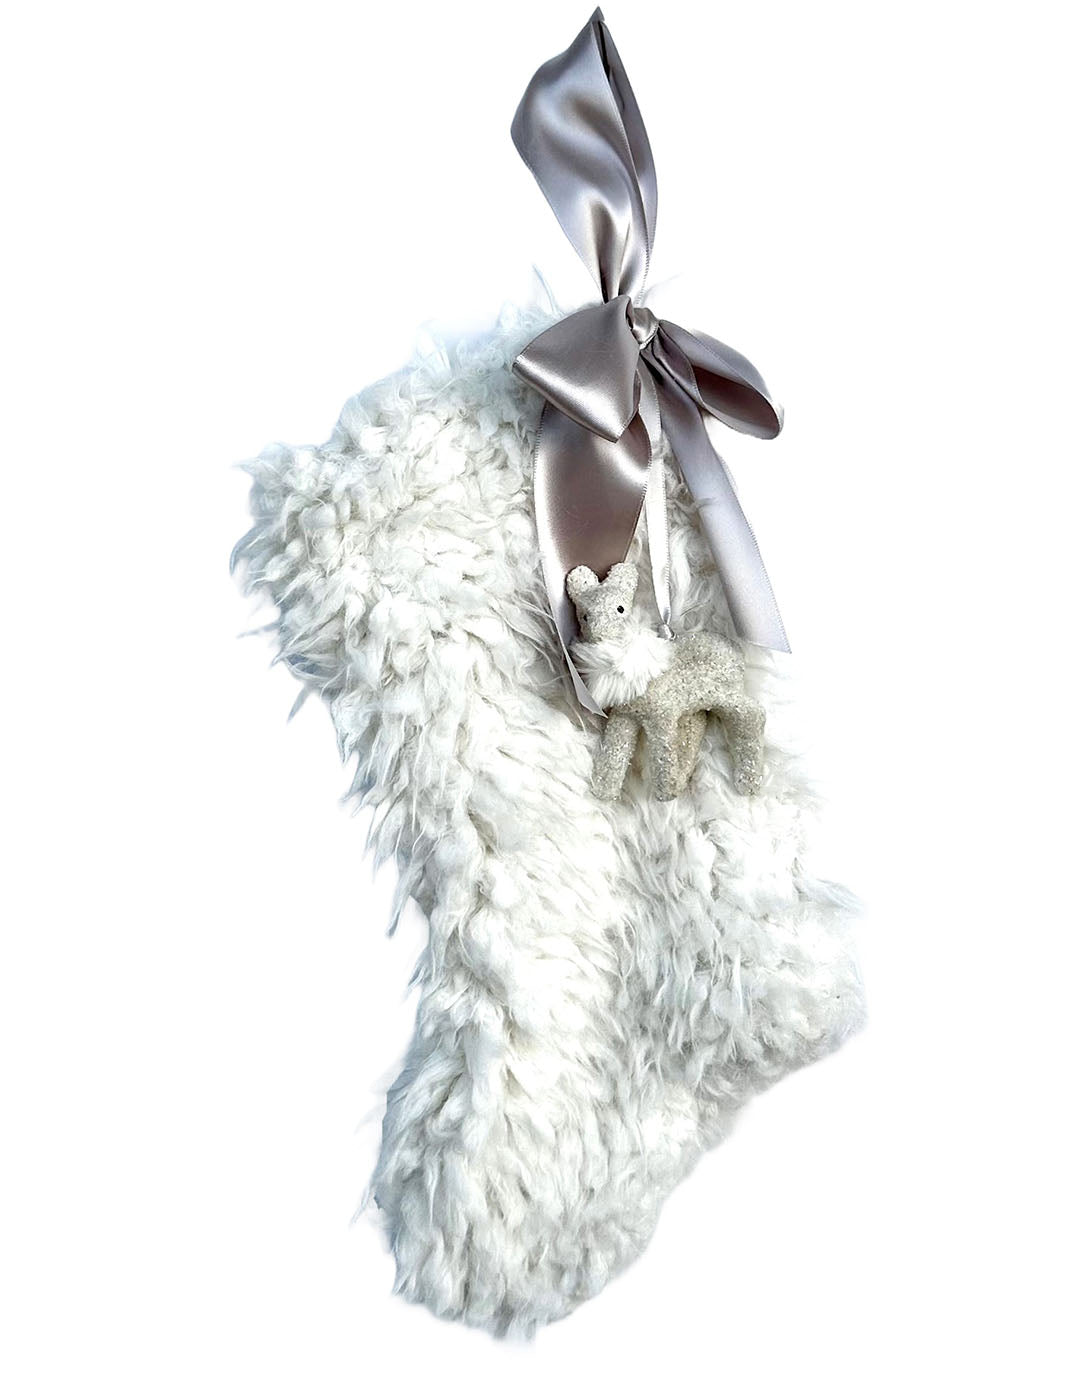 Stocking with Silver Fawn 12" - Small, Shaggy Cream Fur